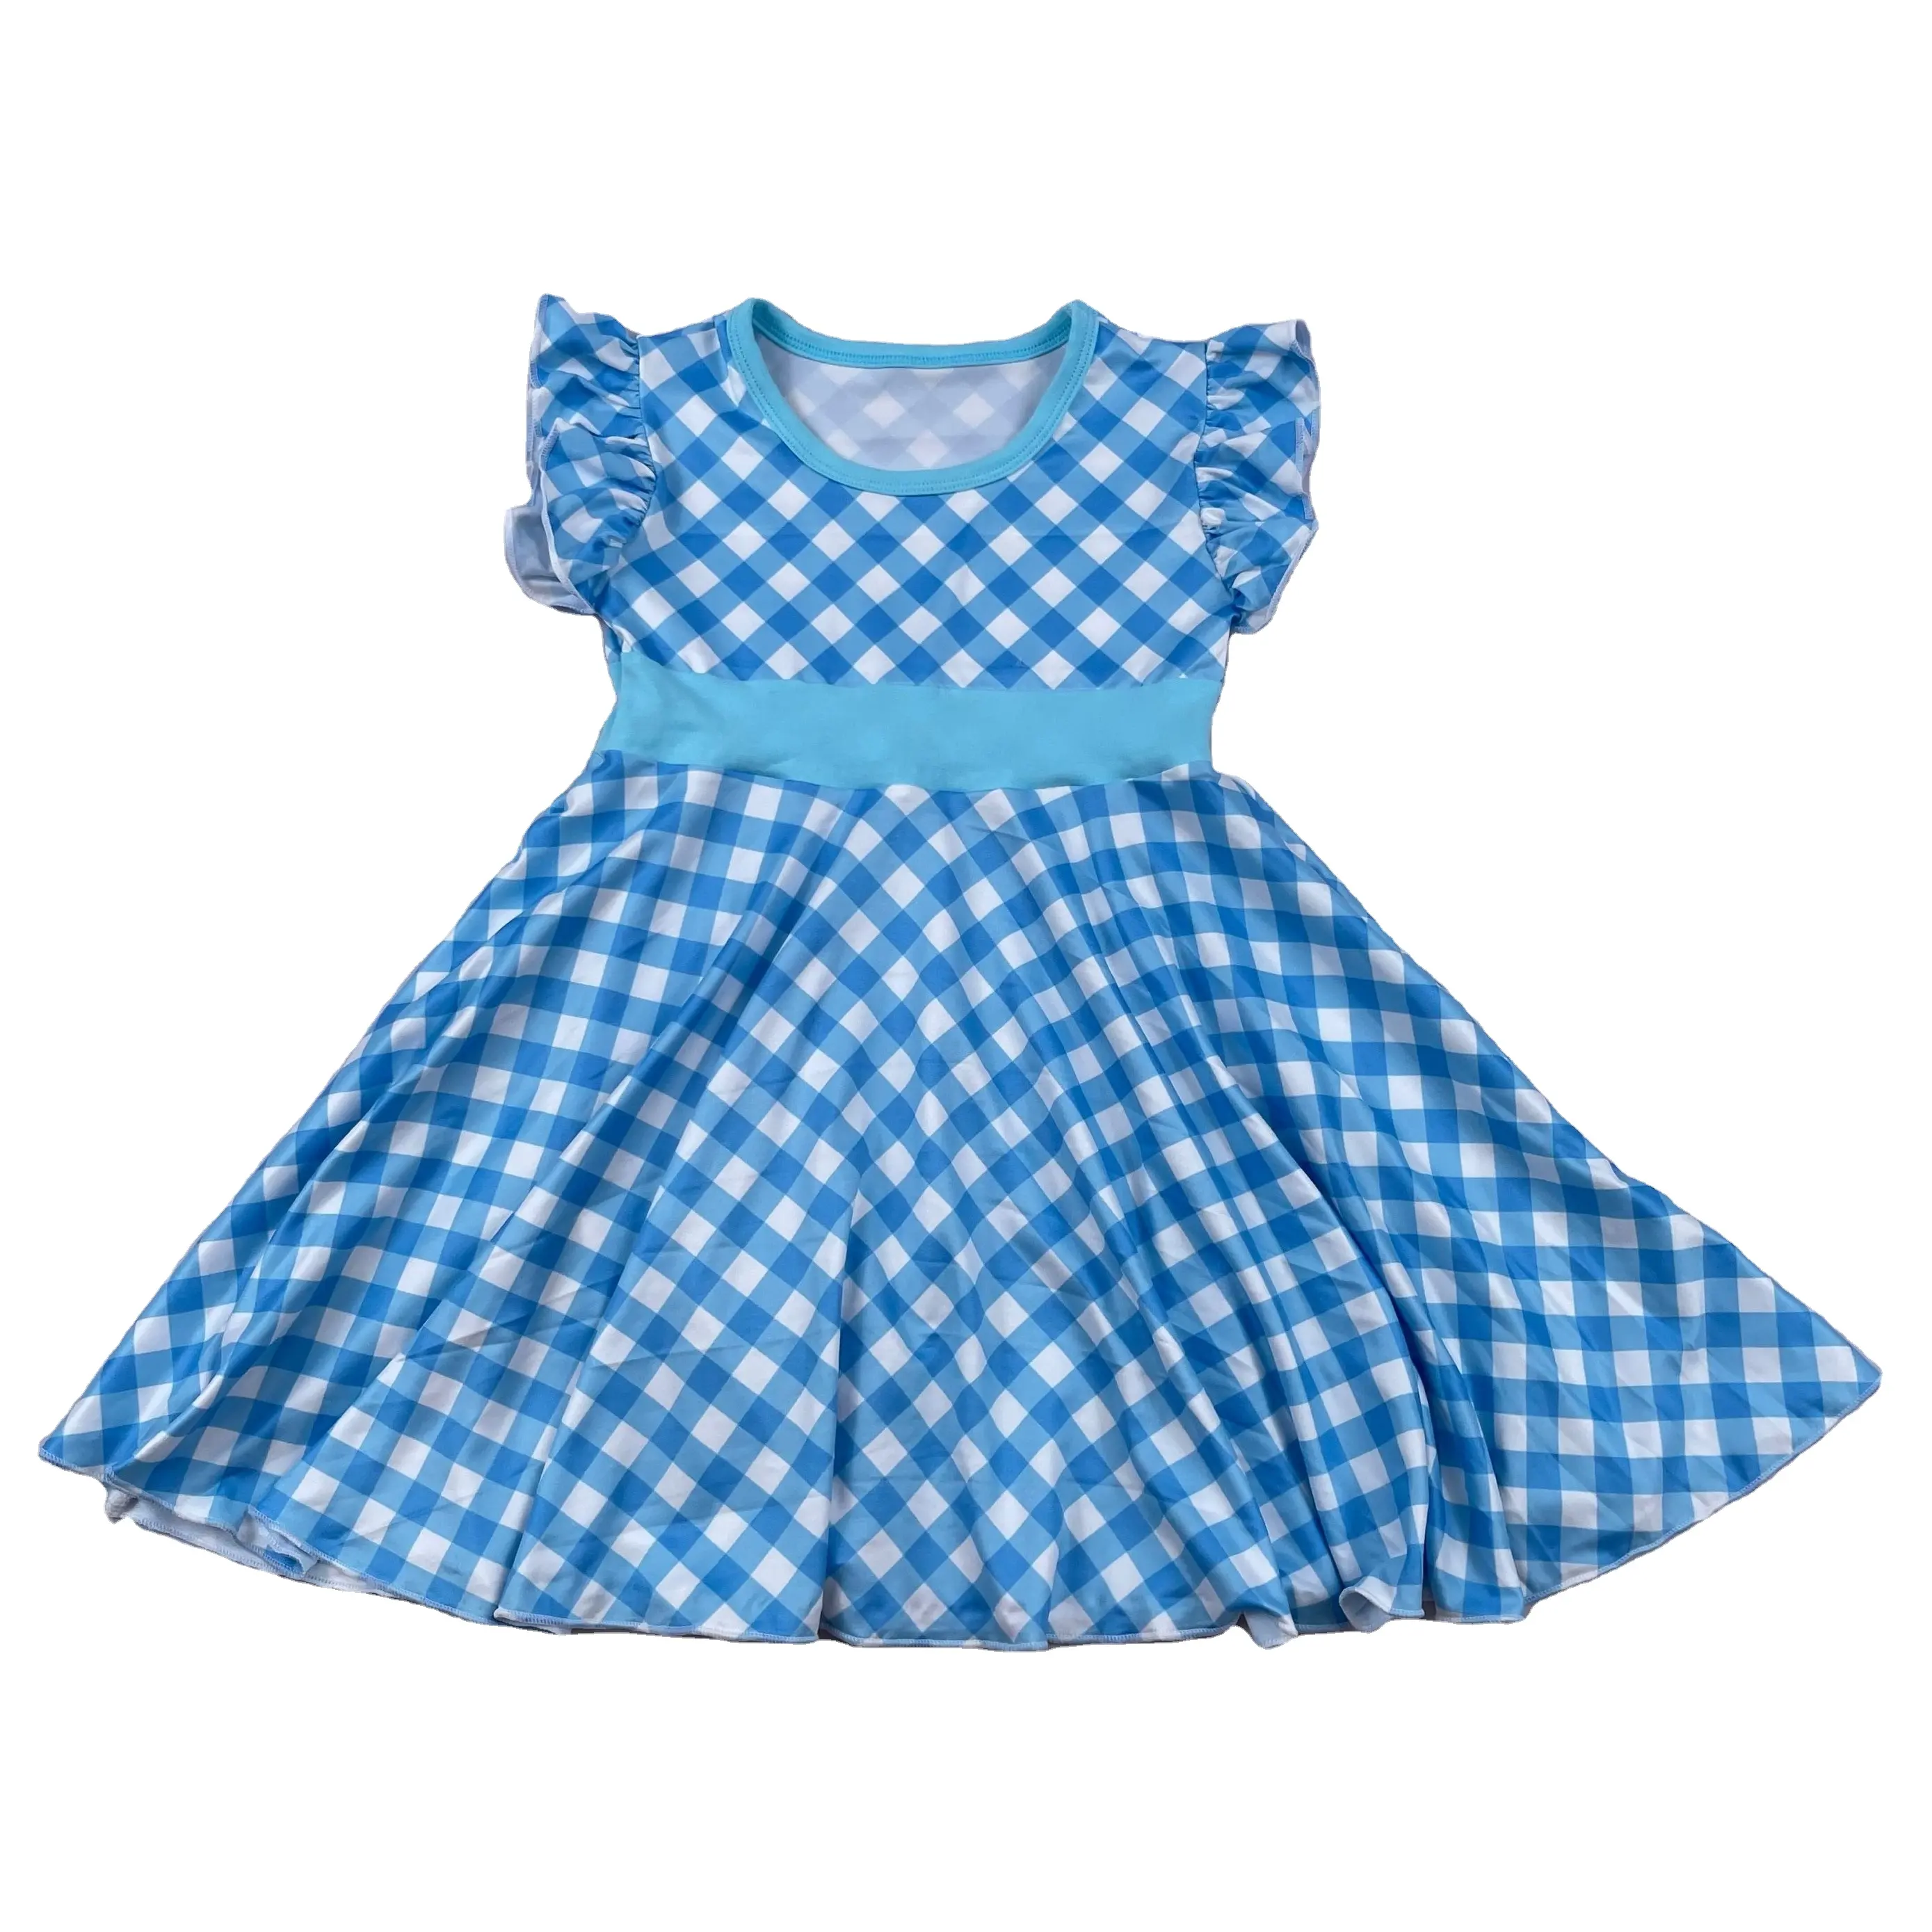 Liangzhe OEM blue plaid princess dress for girl young girls 18 size dresses